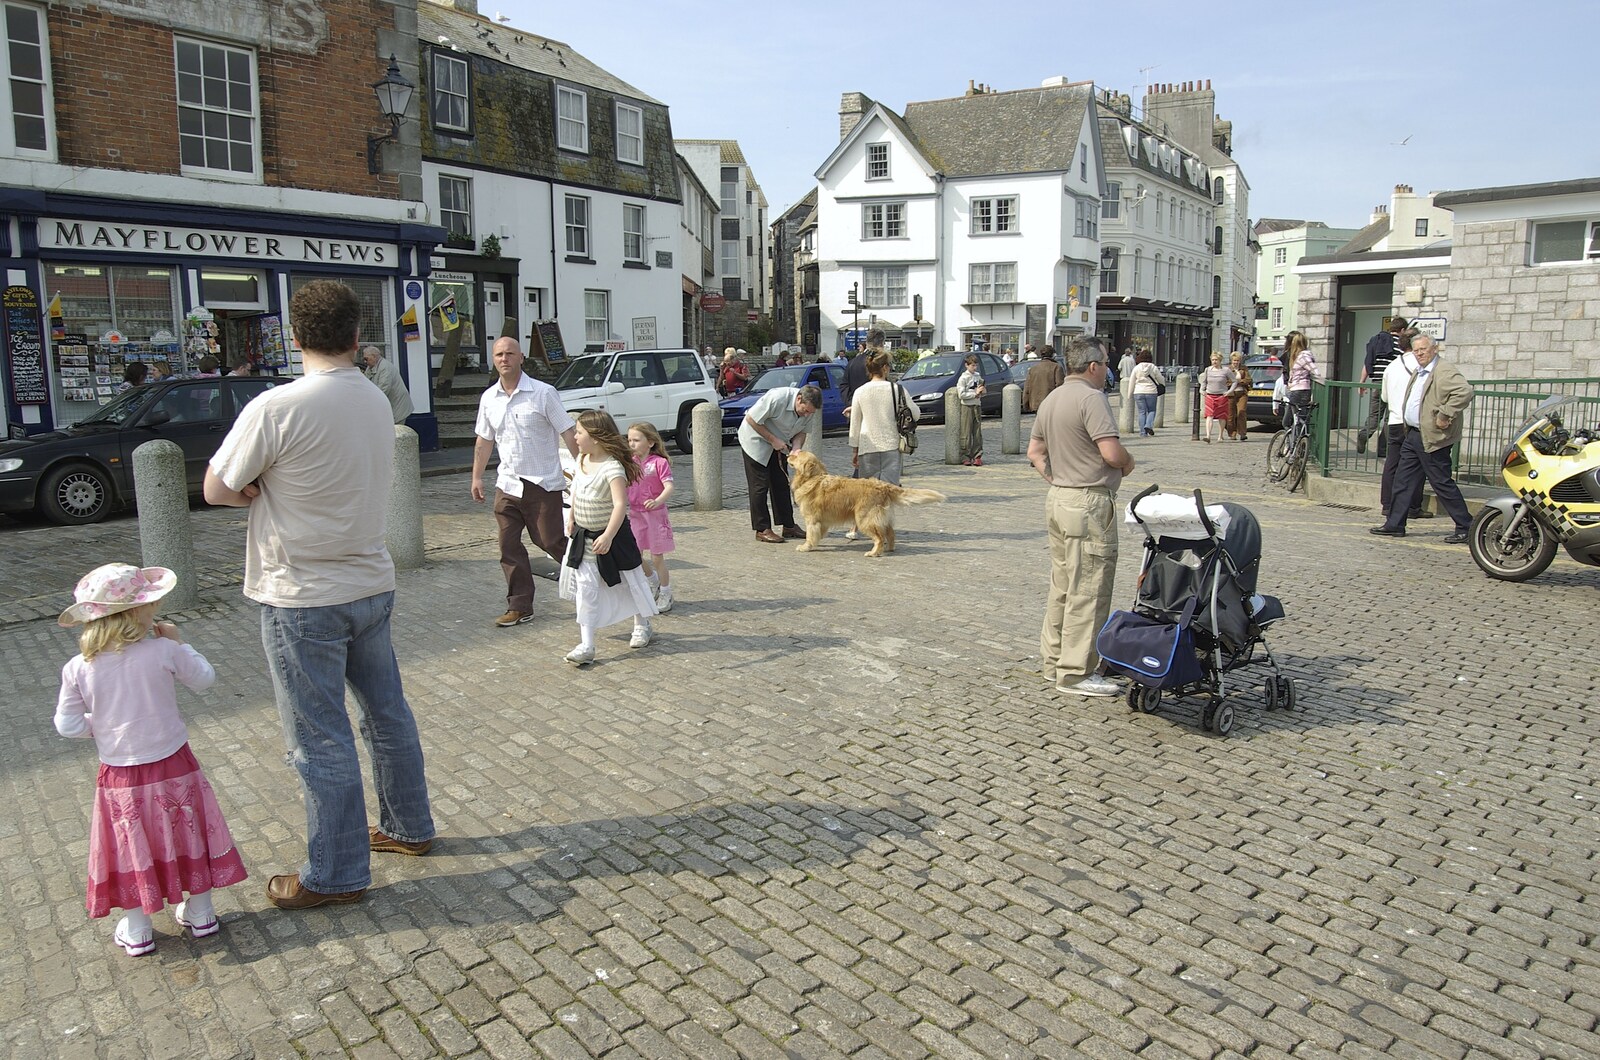 People hang around near New Street from A Trip to The Barbican, Plymouth, Devon - 6th April 2007